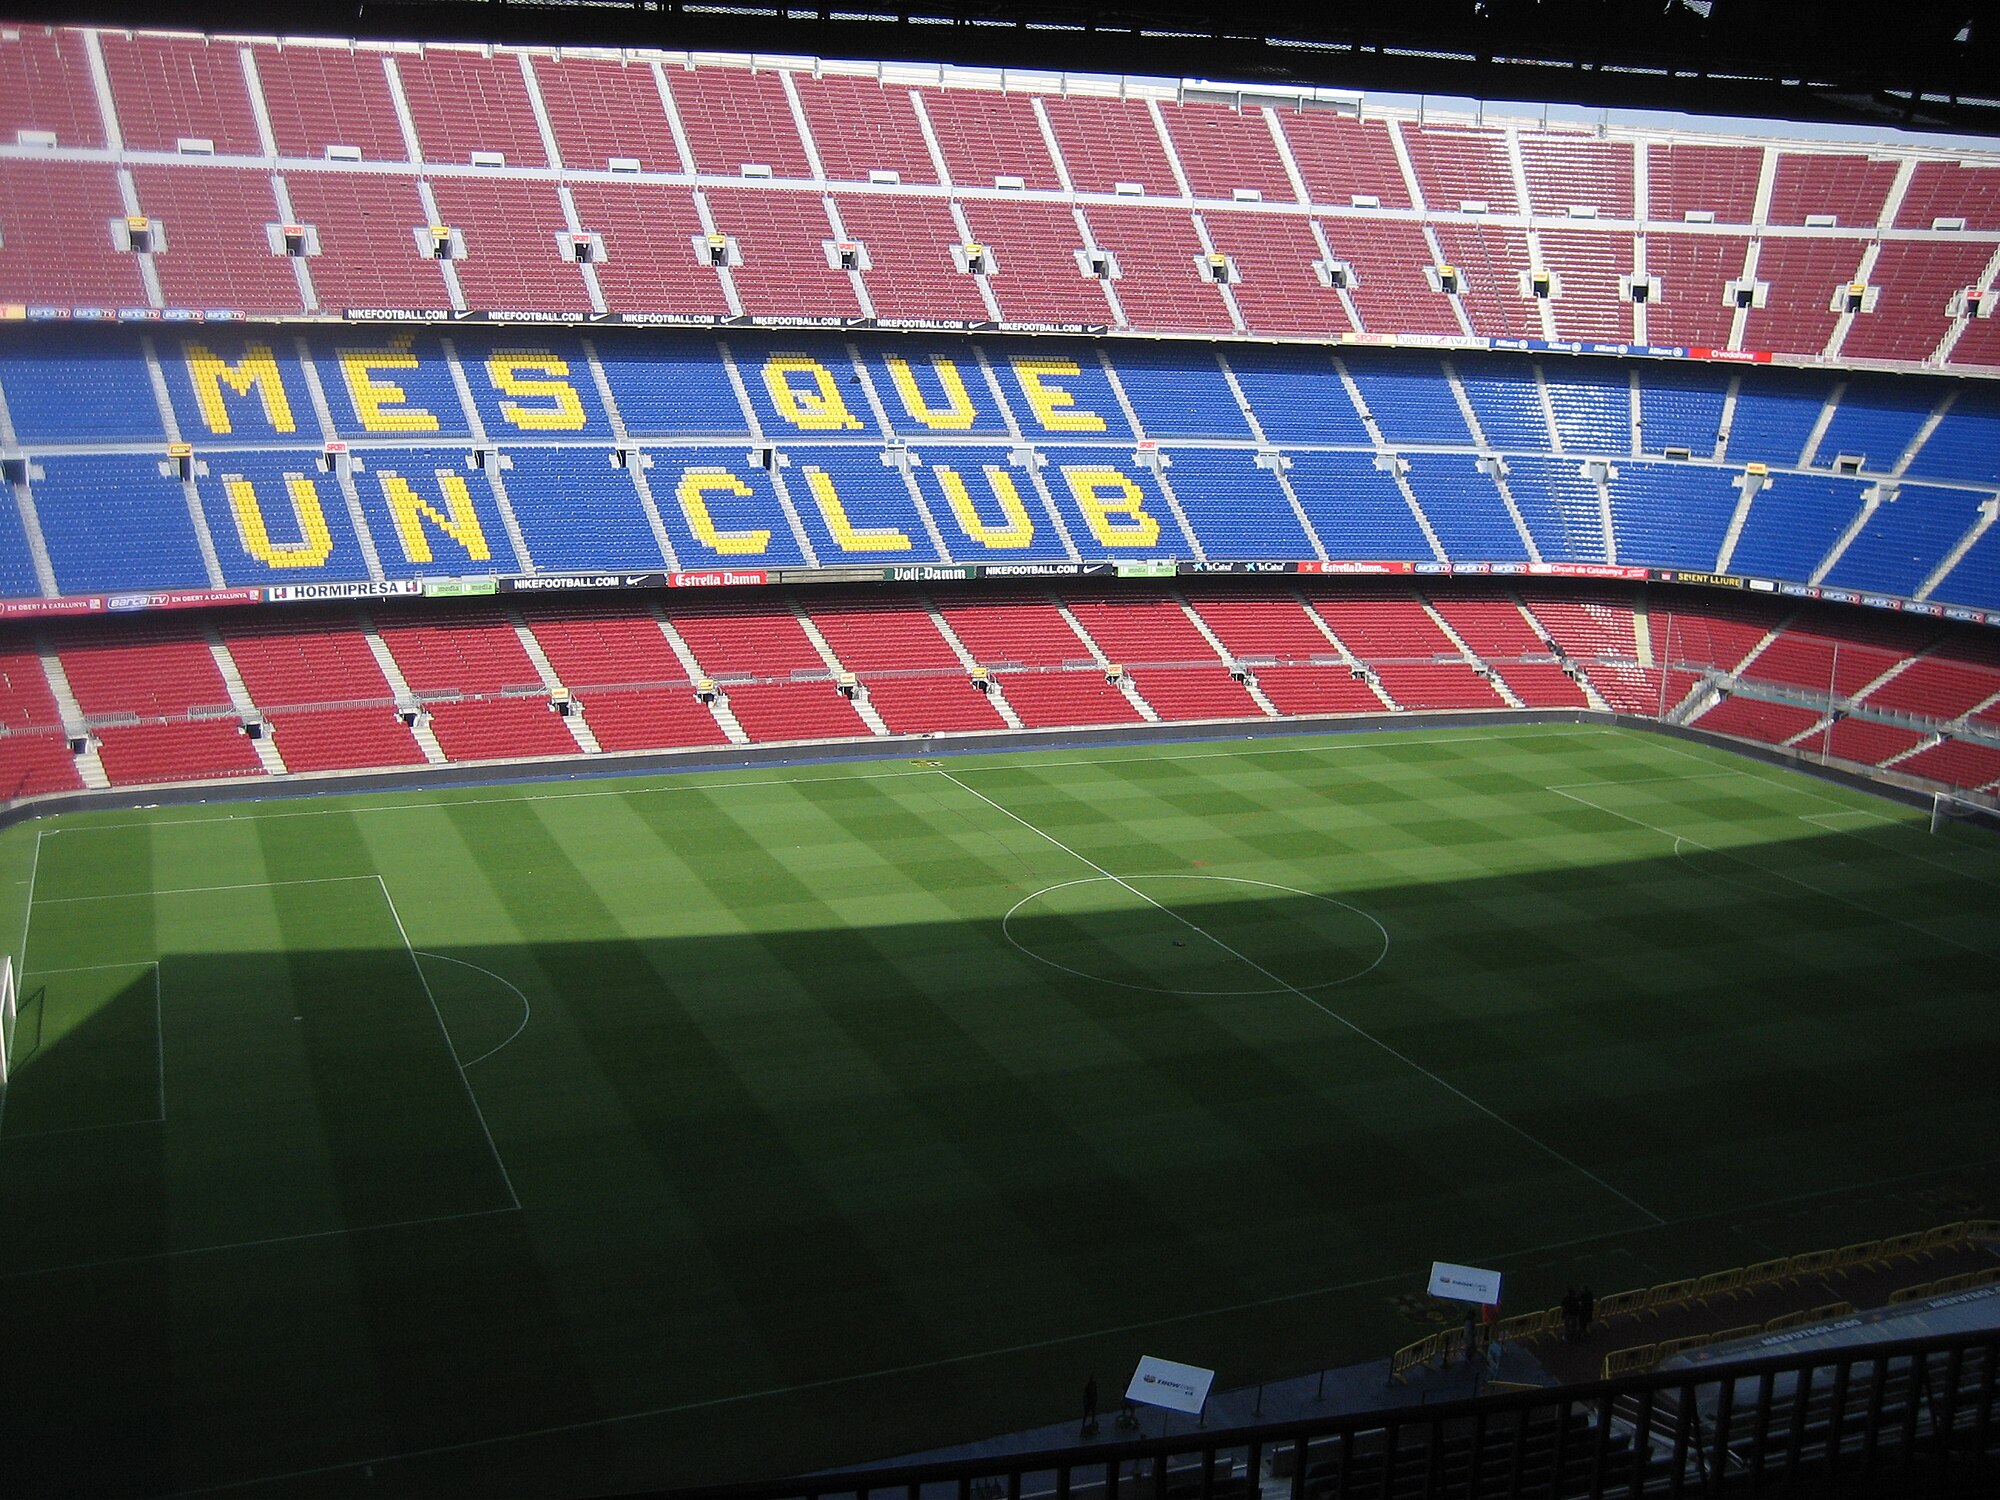 Featured image: Wikimedia Commons Stefano Vigorelli https://commons.m.wikimedia.org/wiki/File:Camp_Nou_-_FC_Barcelona,_SP(5).jpg CC BY-SA 4.0 https://creativecommons.org/licenses/by-sa/4.0